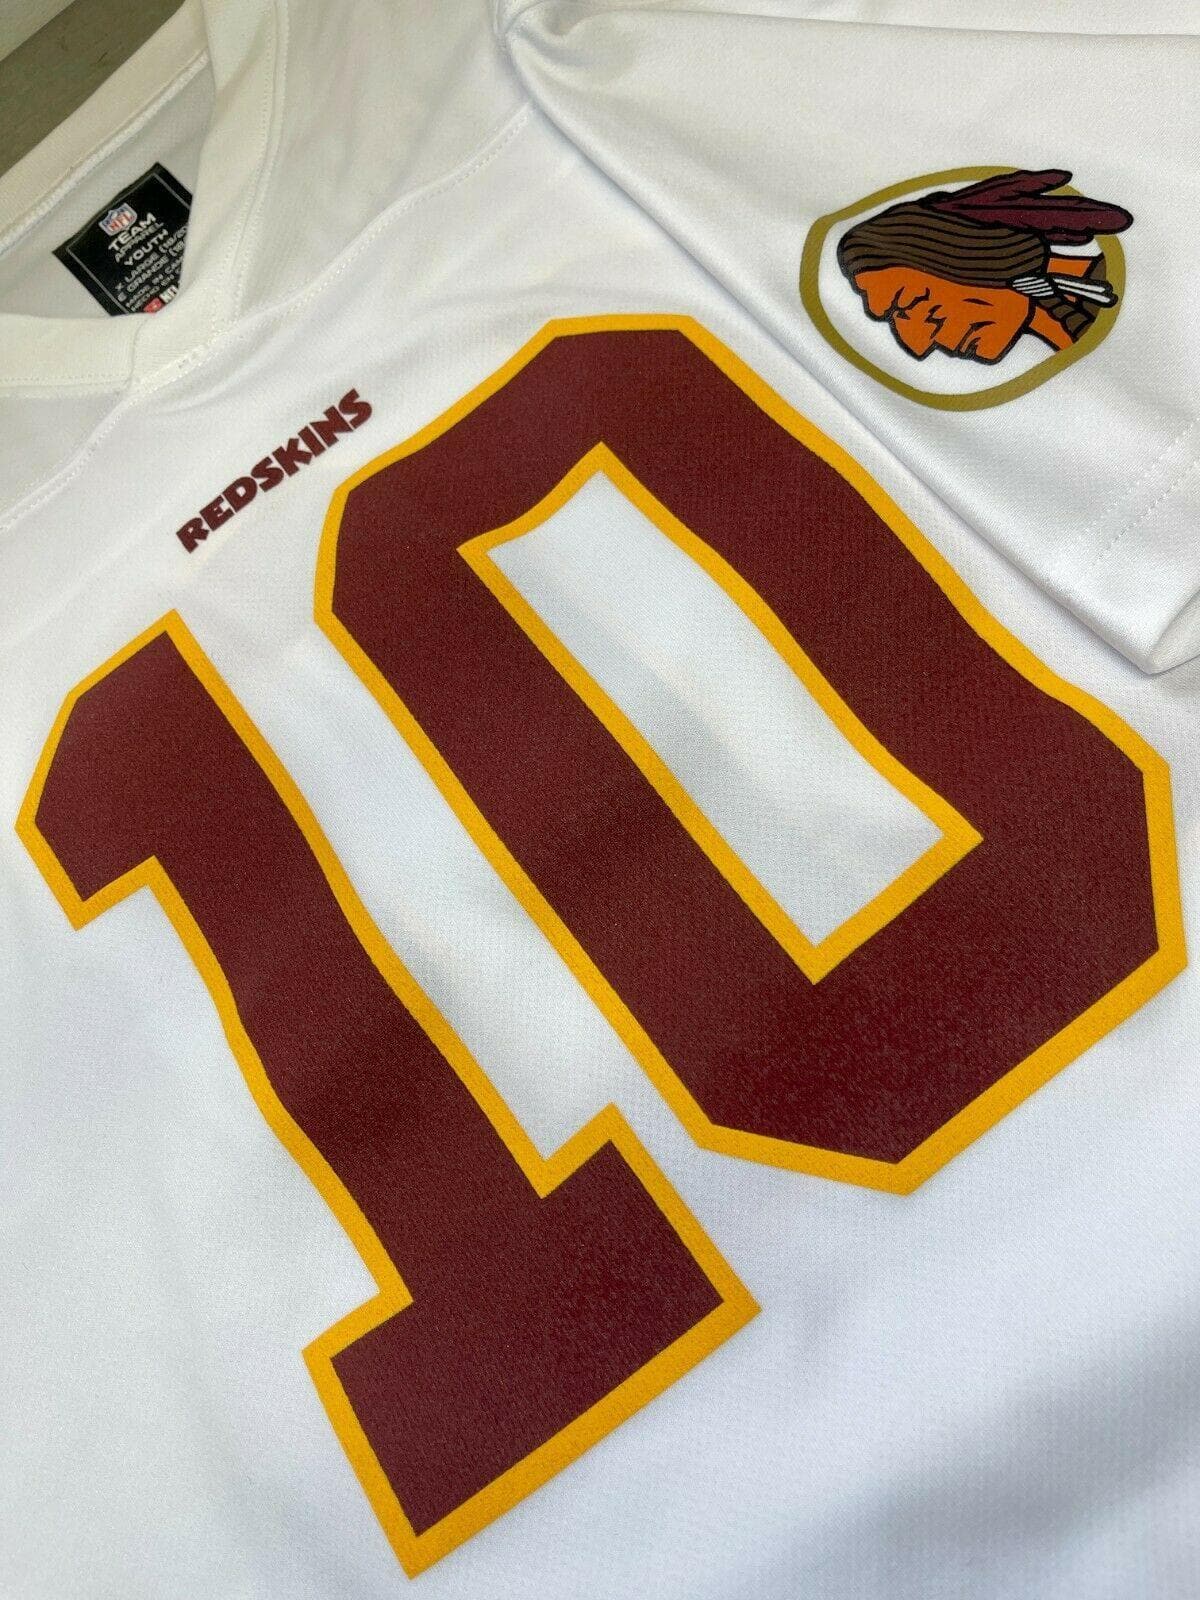 NFL Washington Commanders (Redskins) Griffin III RG3 Jersey Youth X-Large